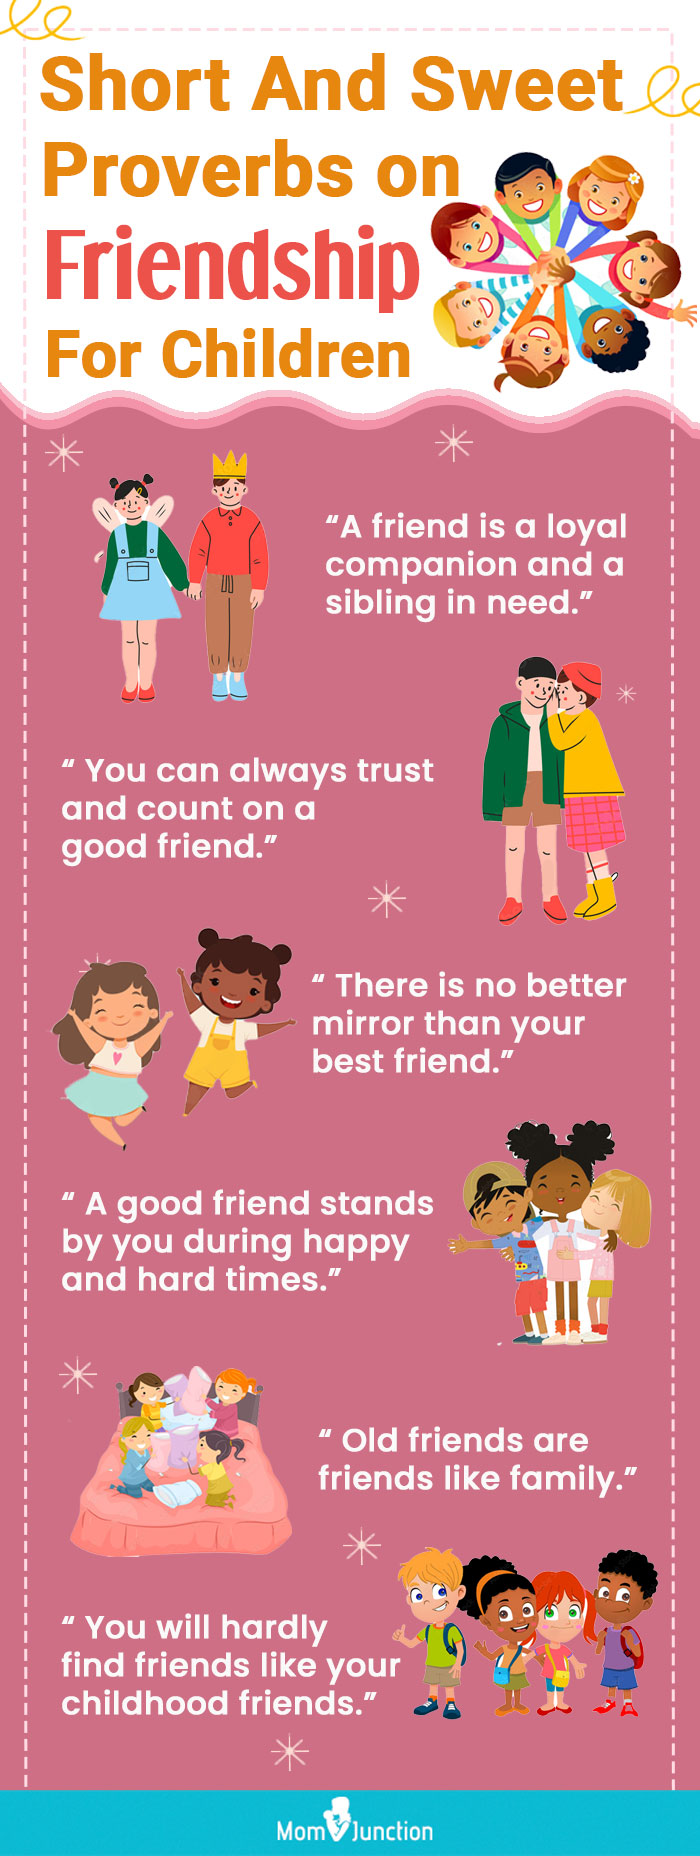 sayings on friendship for children (infographic)